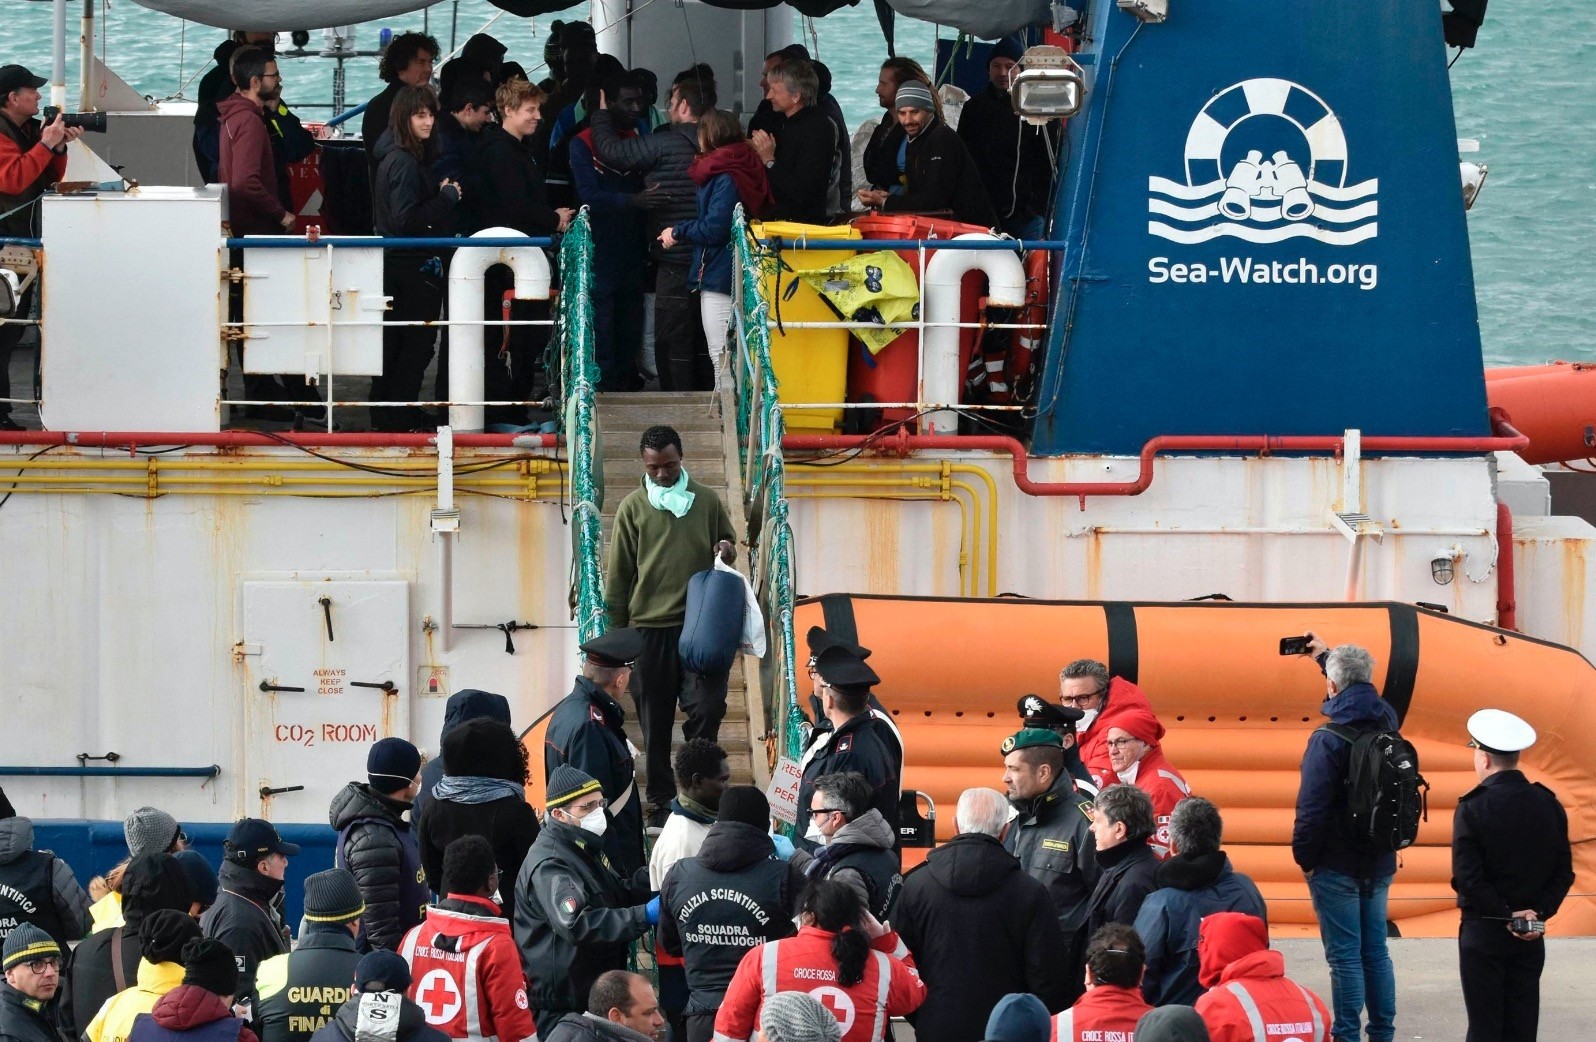 Migrants disembark from the rescue ship Sea-Watch 3 as it docked at the Sicilian port of Catania, Jan. 30, 2019.